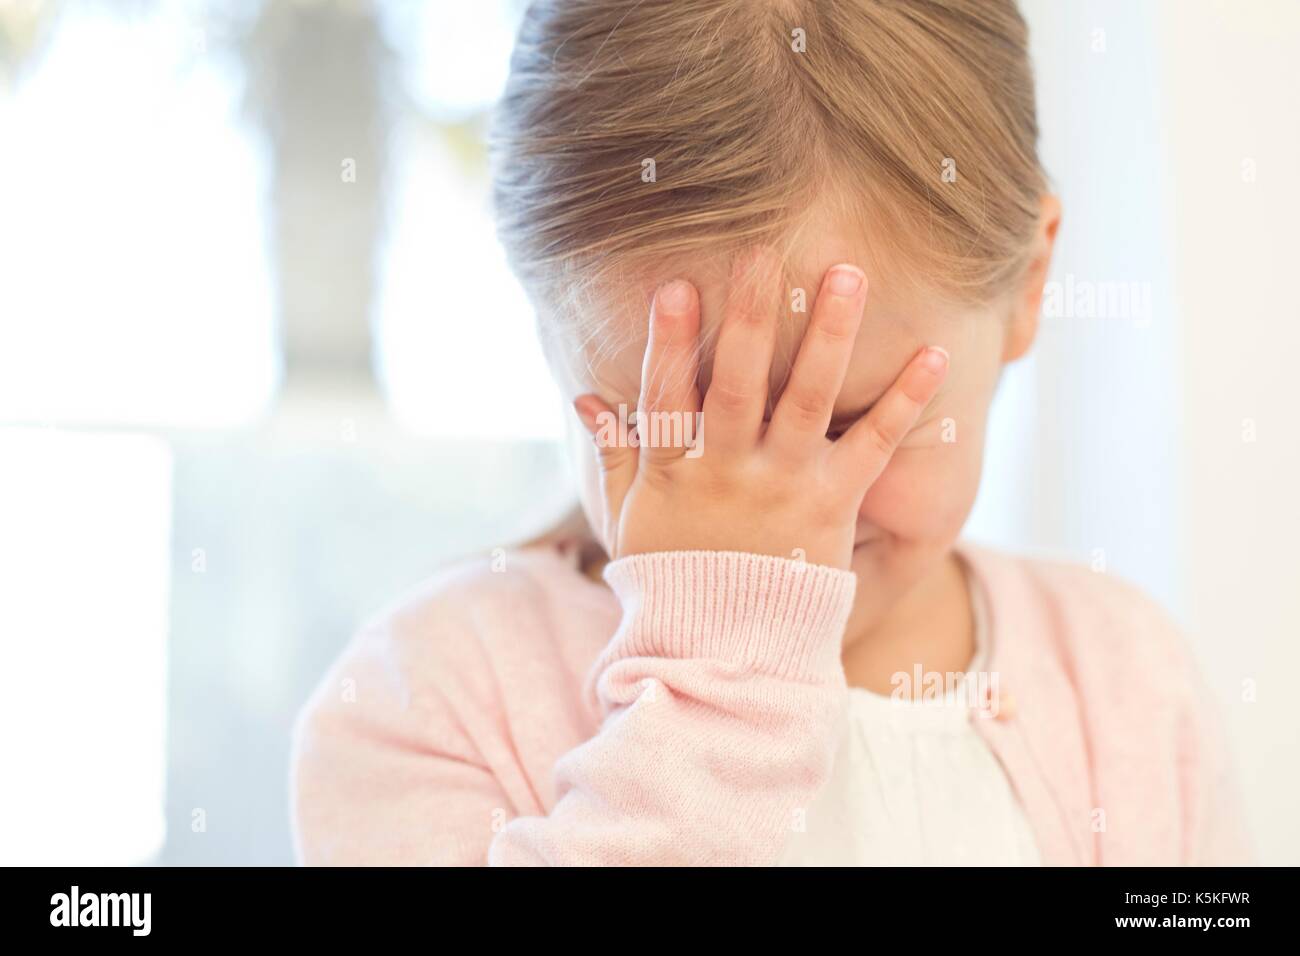 Young girl with hand on face. Stock Photo